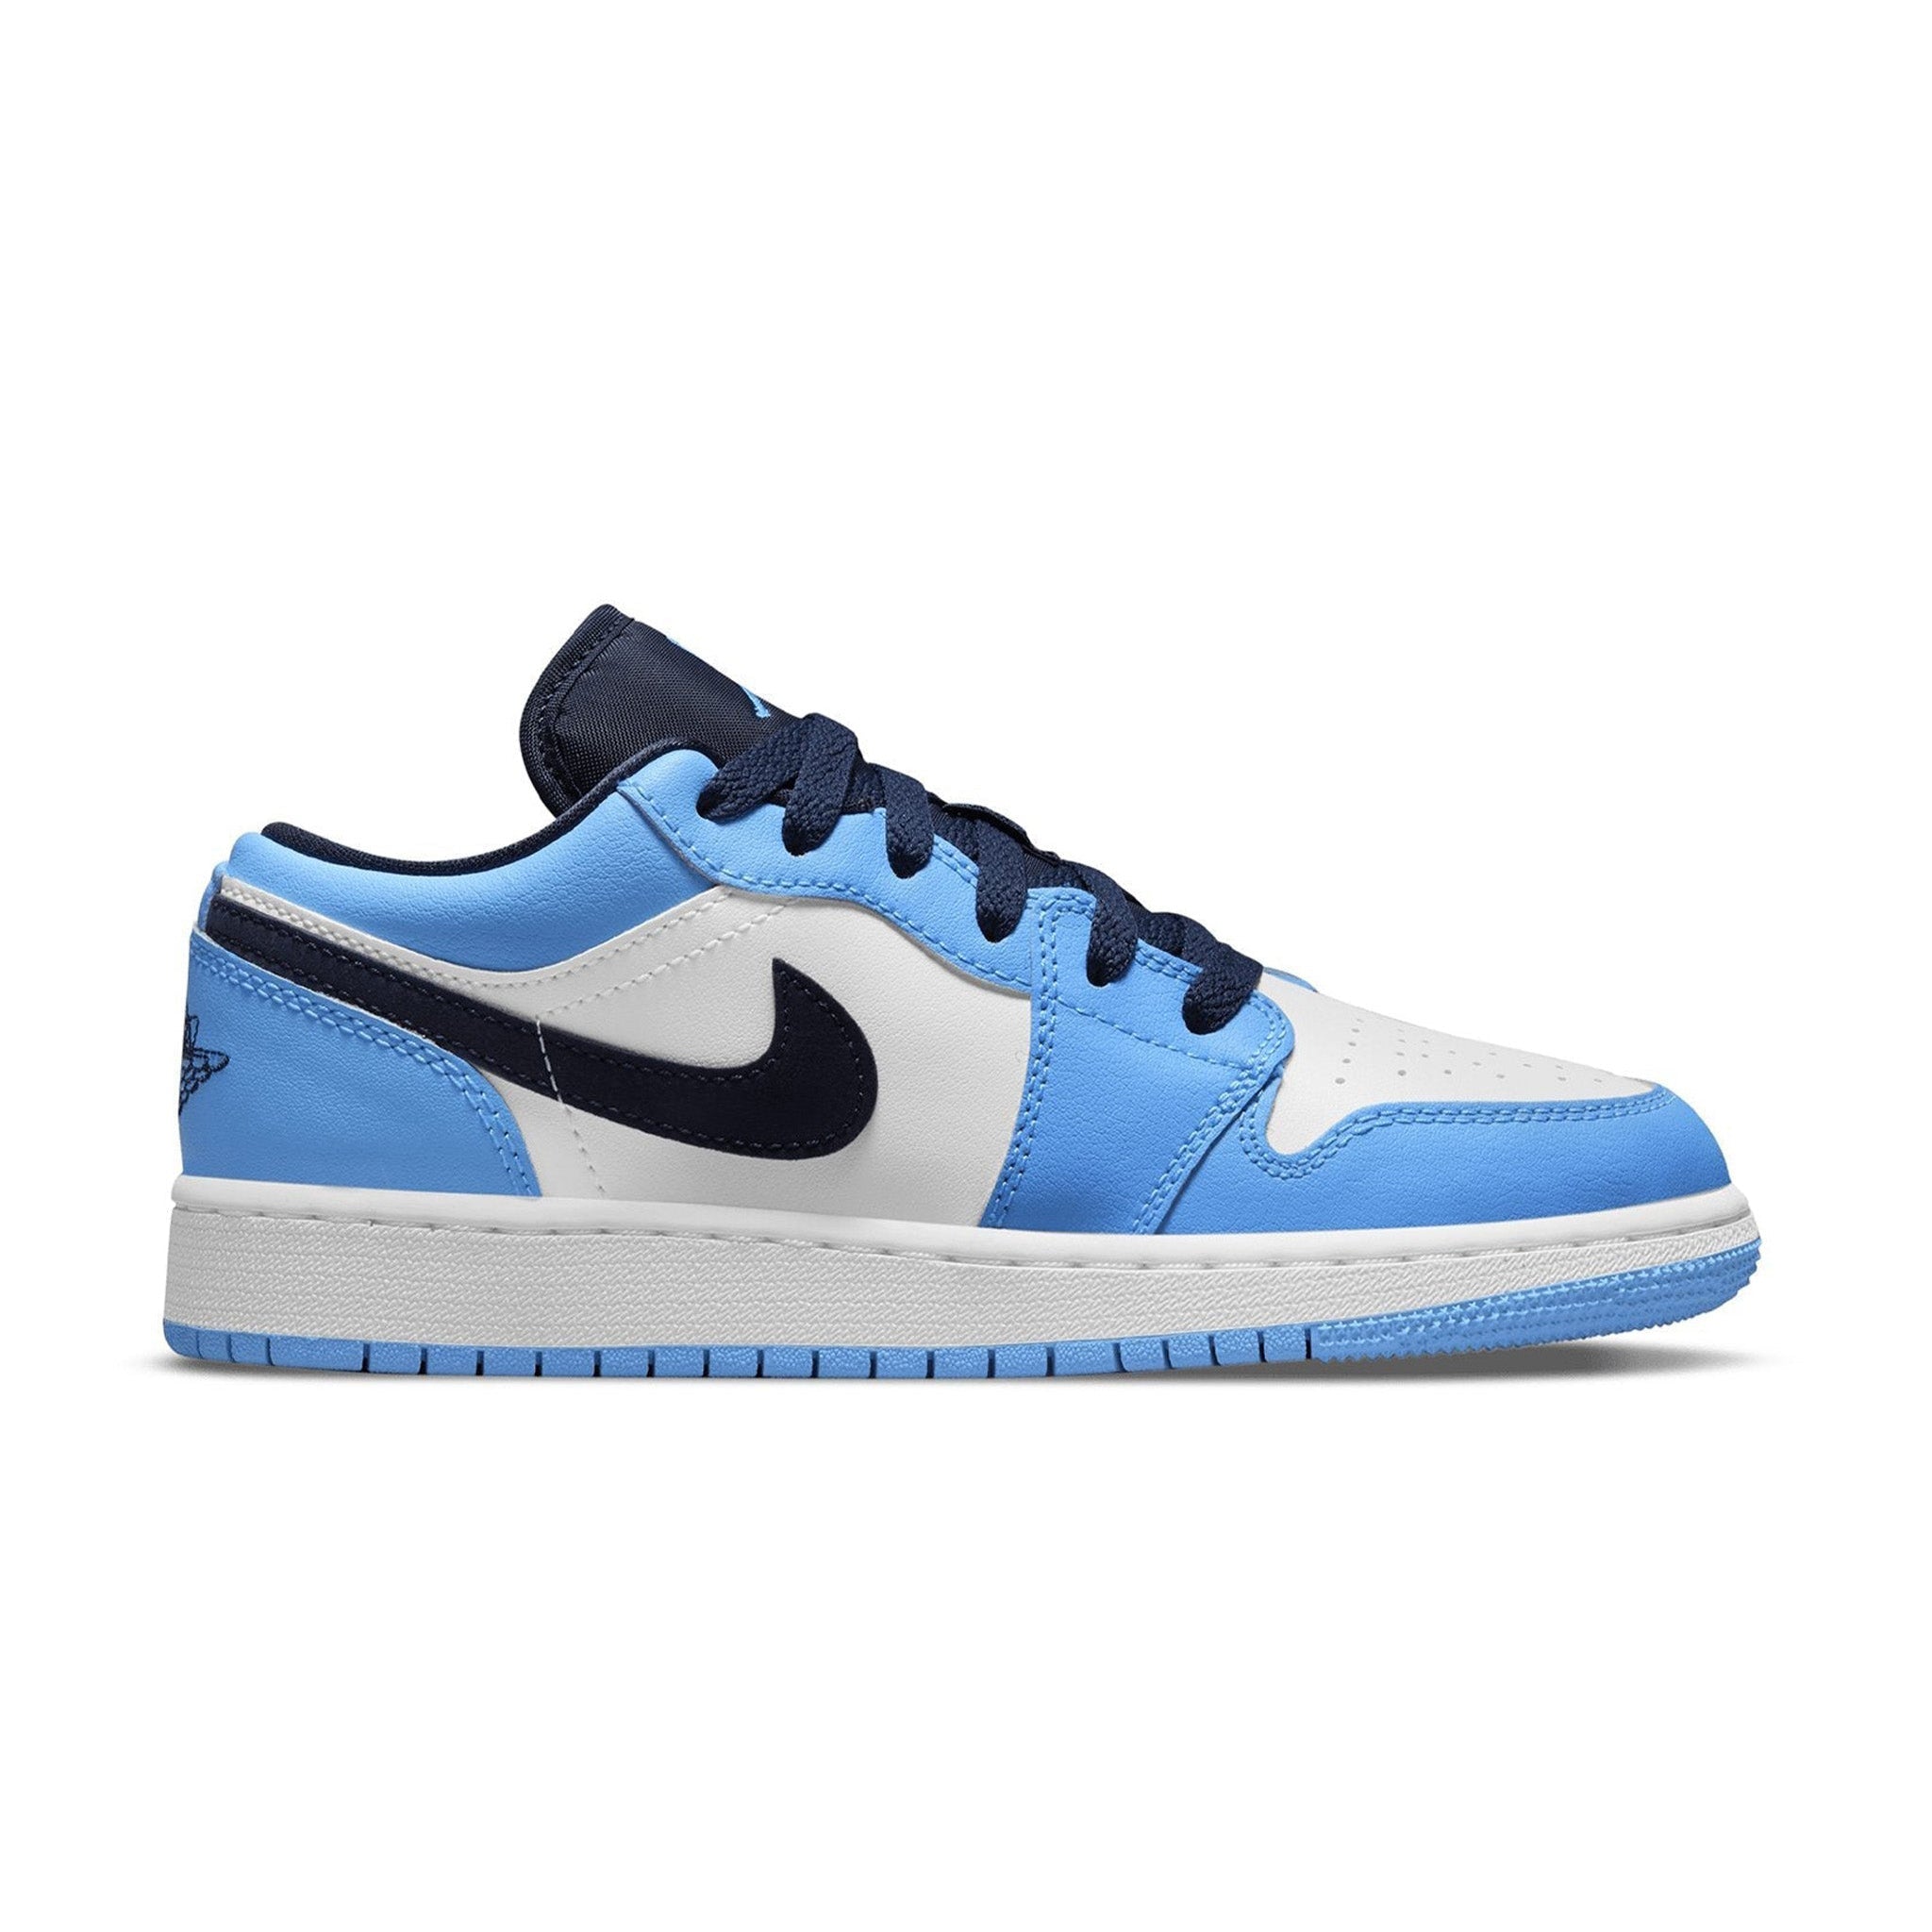 Nike x Off-White - Authenticated Air Jordan 1 Trainer - Leather Blue for Men, Never Worn